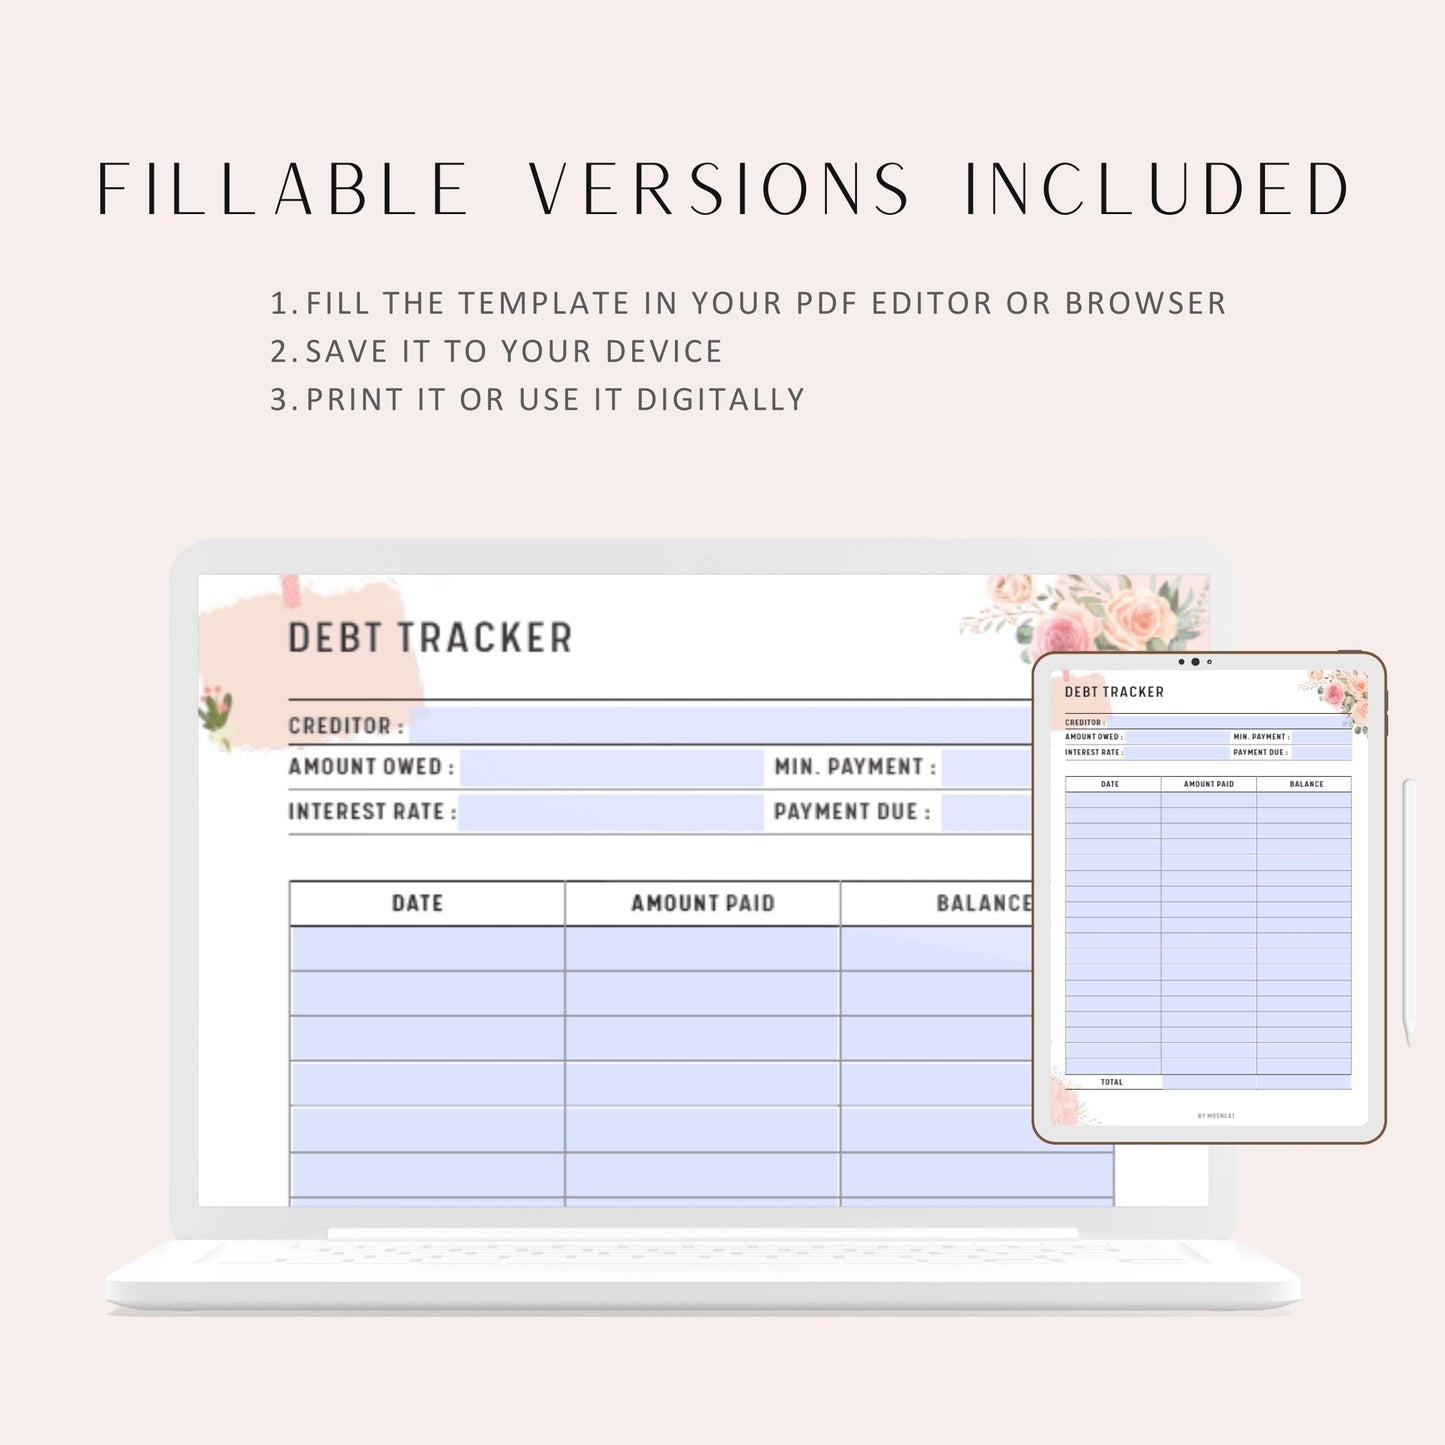 Floral Debt Payment Tracker Template Printable Planner, Digital Planner, Printable Inserts, A4, A5, Letter, Half Letter, Fillable PDF Included